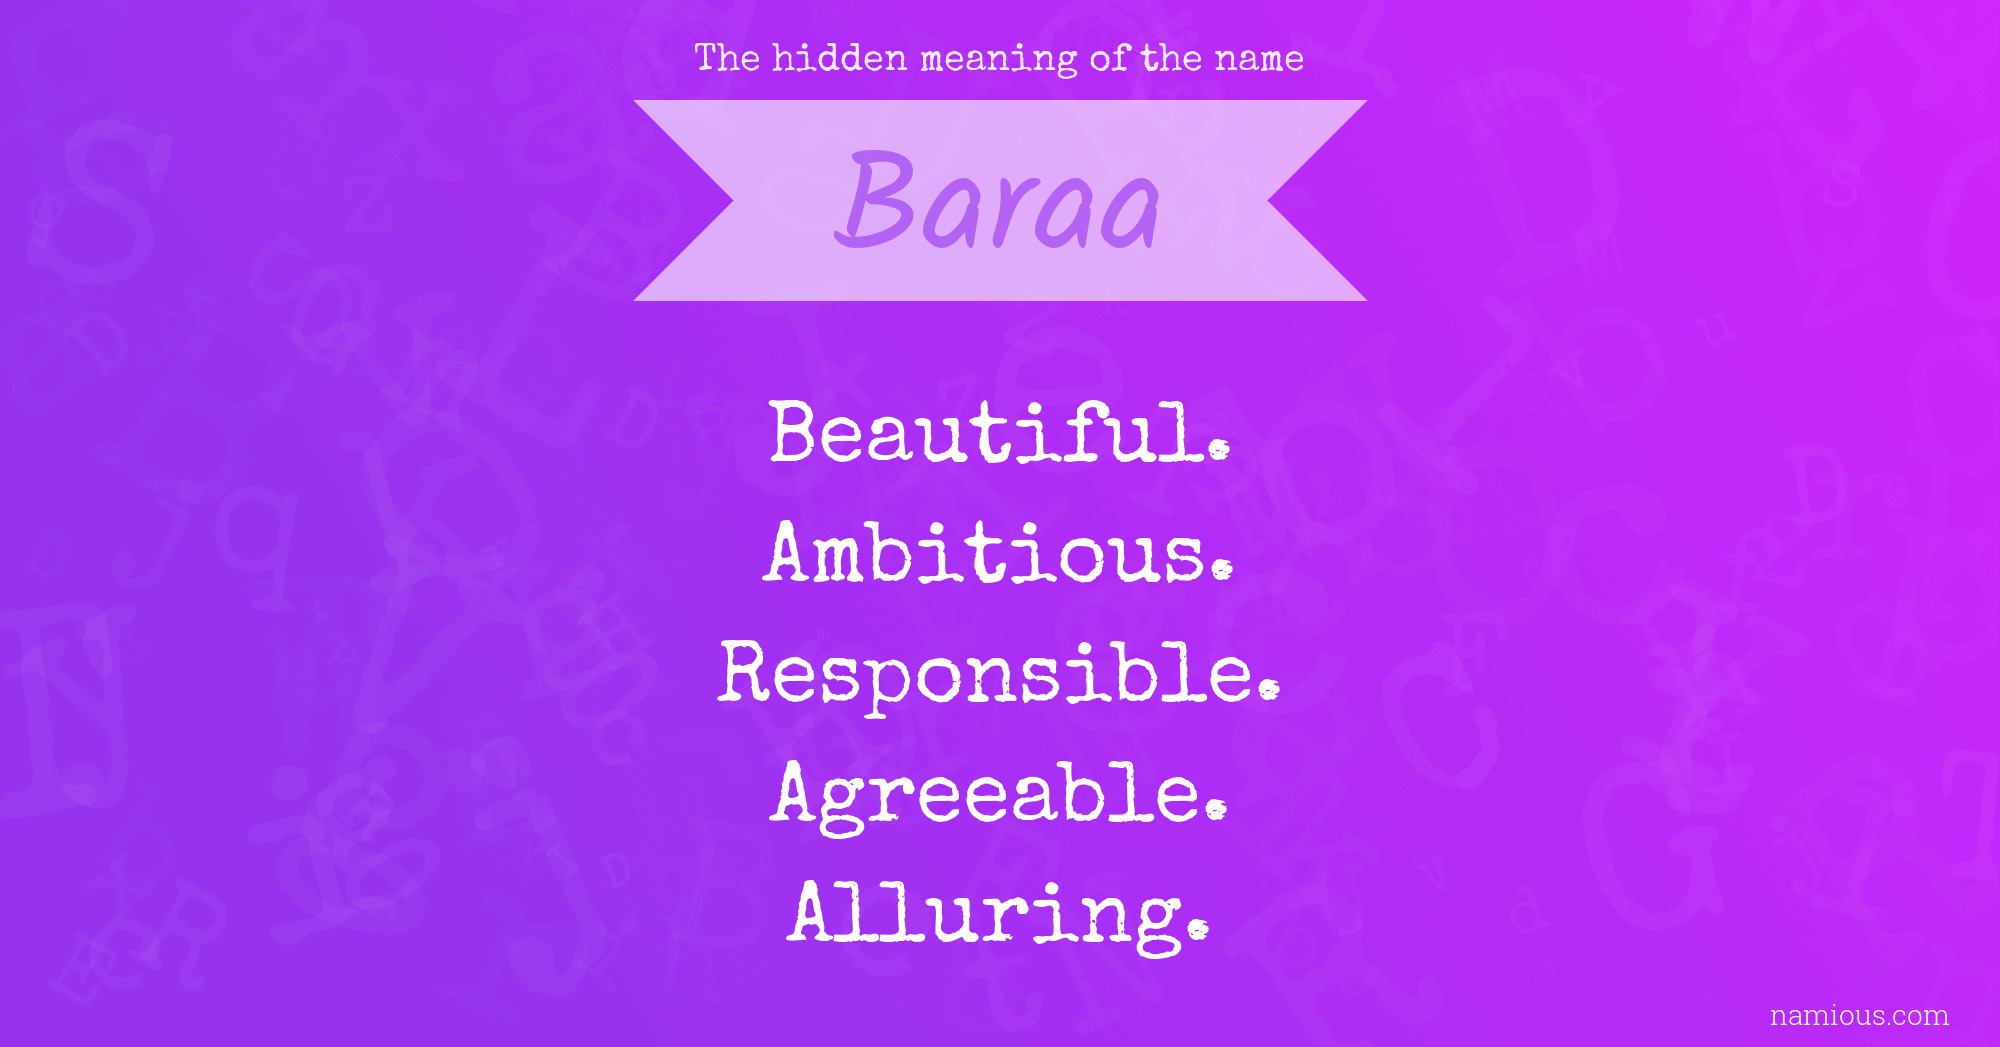 The hidden meaning of the name Baraa